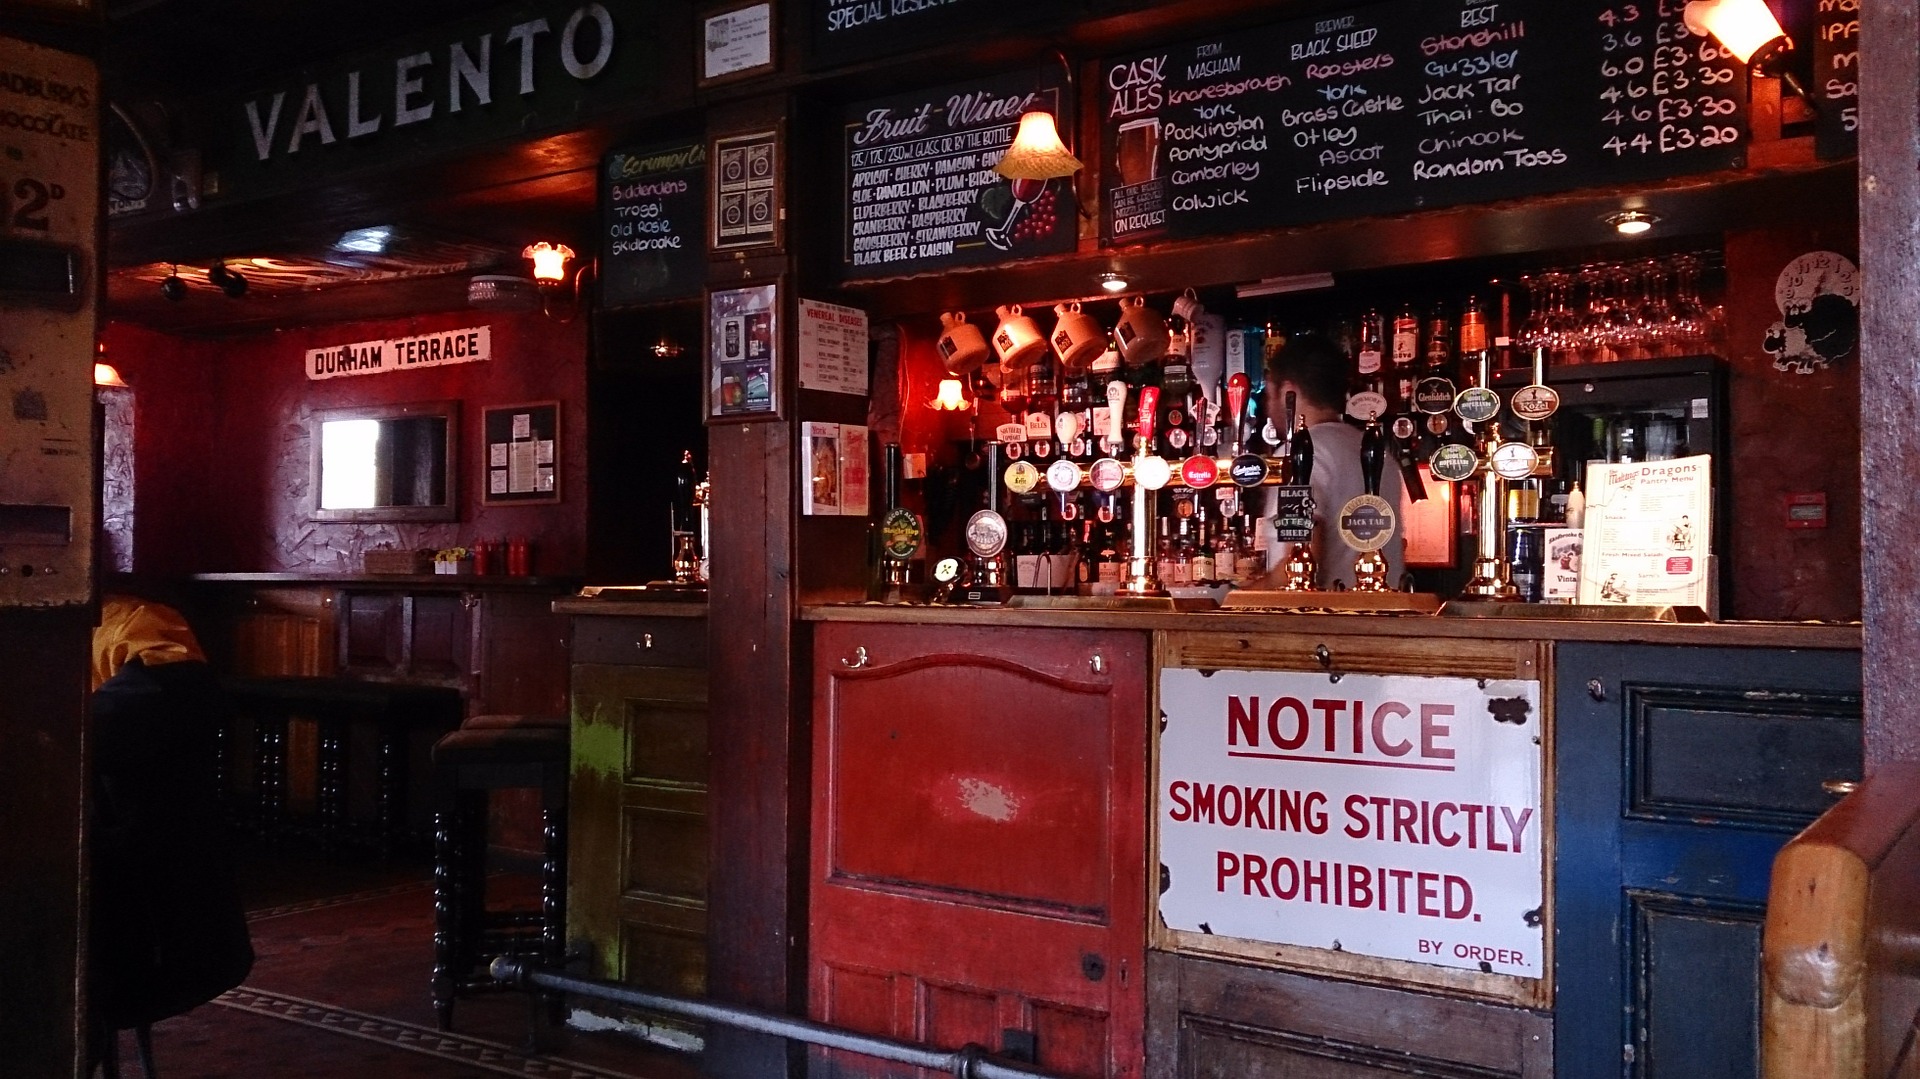 Fire-Ravaged Pubs Experience the Realities of Underinsurance